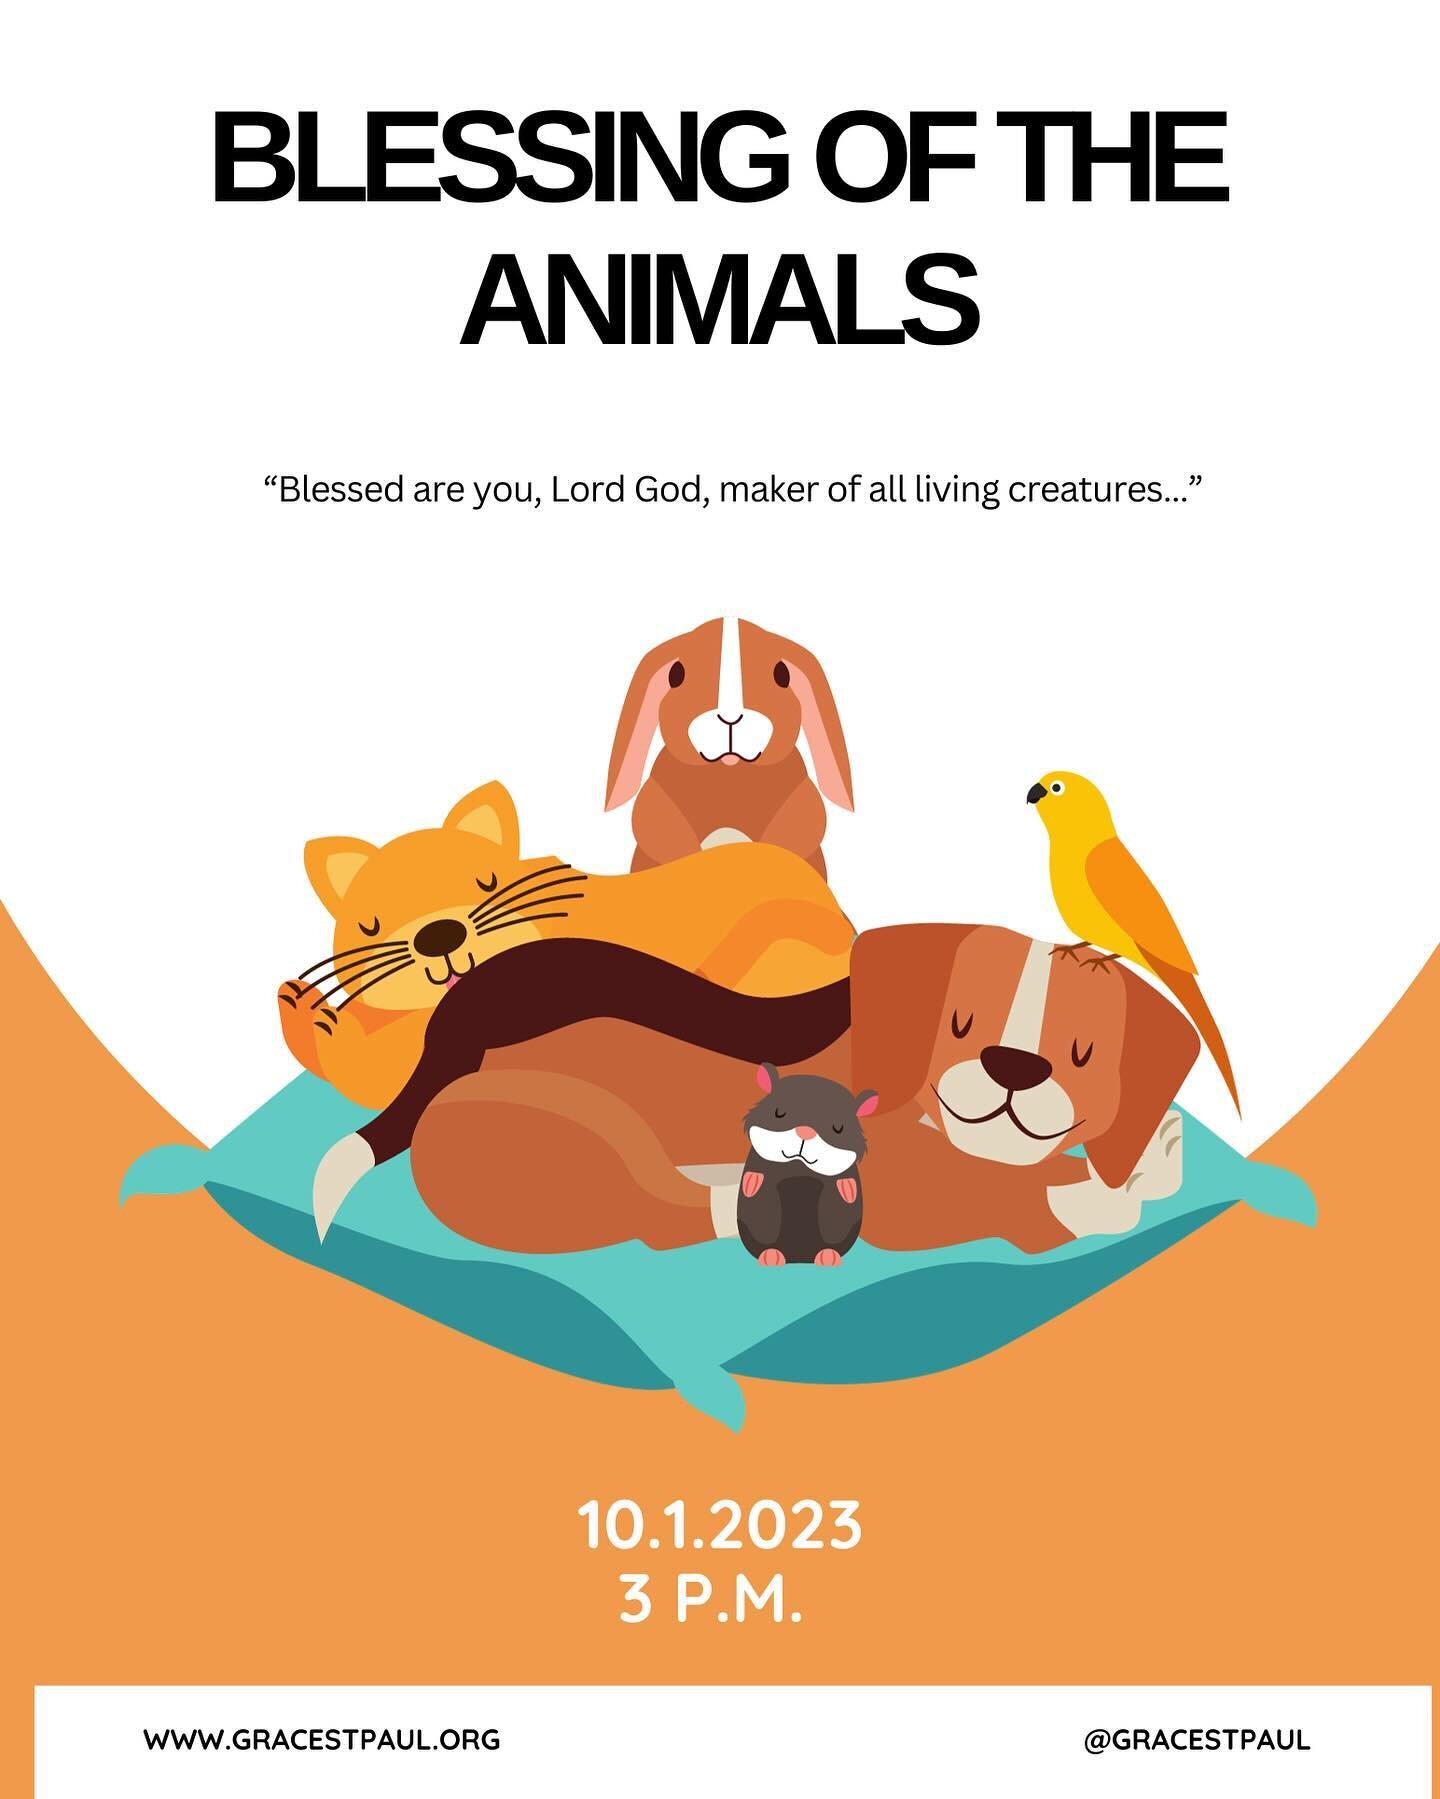 Please join us on Sunday, October 1st for the Blessing of the Animals! All animals are welcome, leashed or in cages as appropriate. See you there! 🐶💒